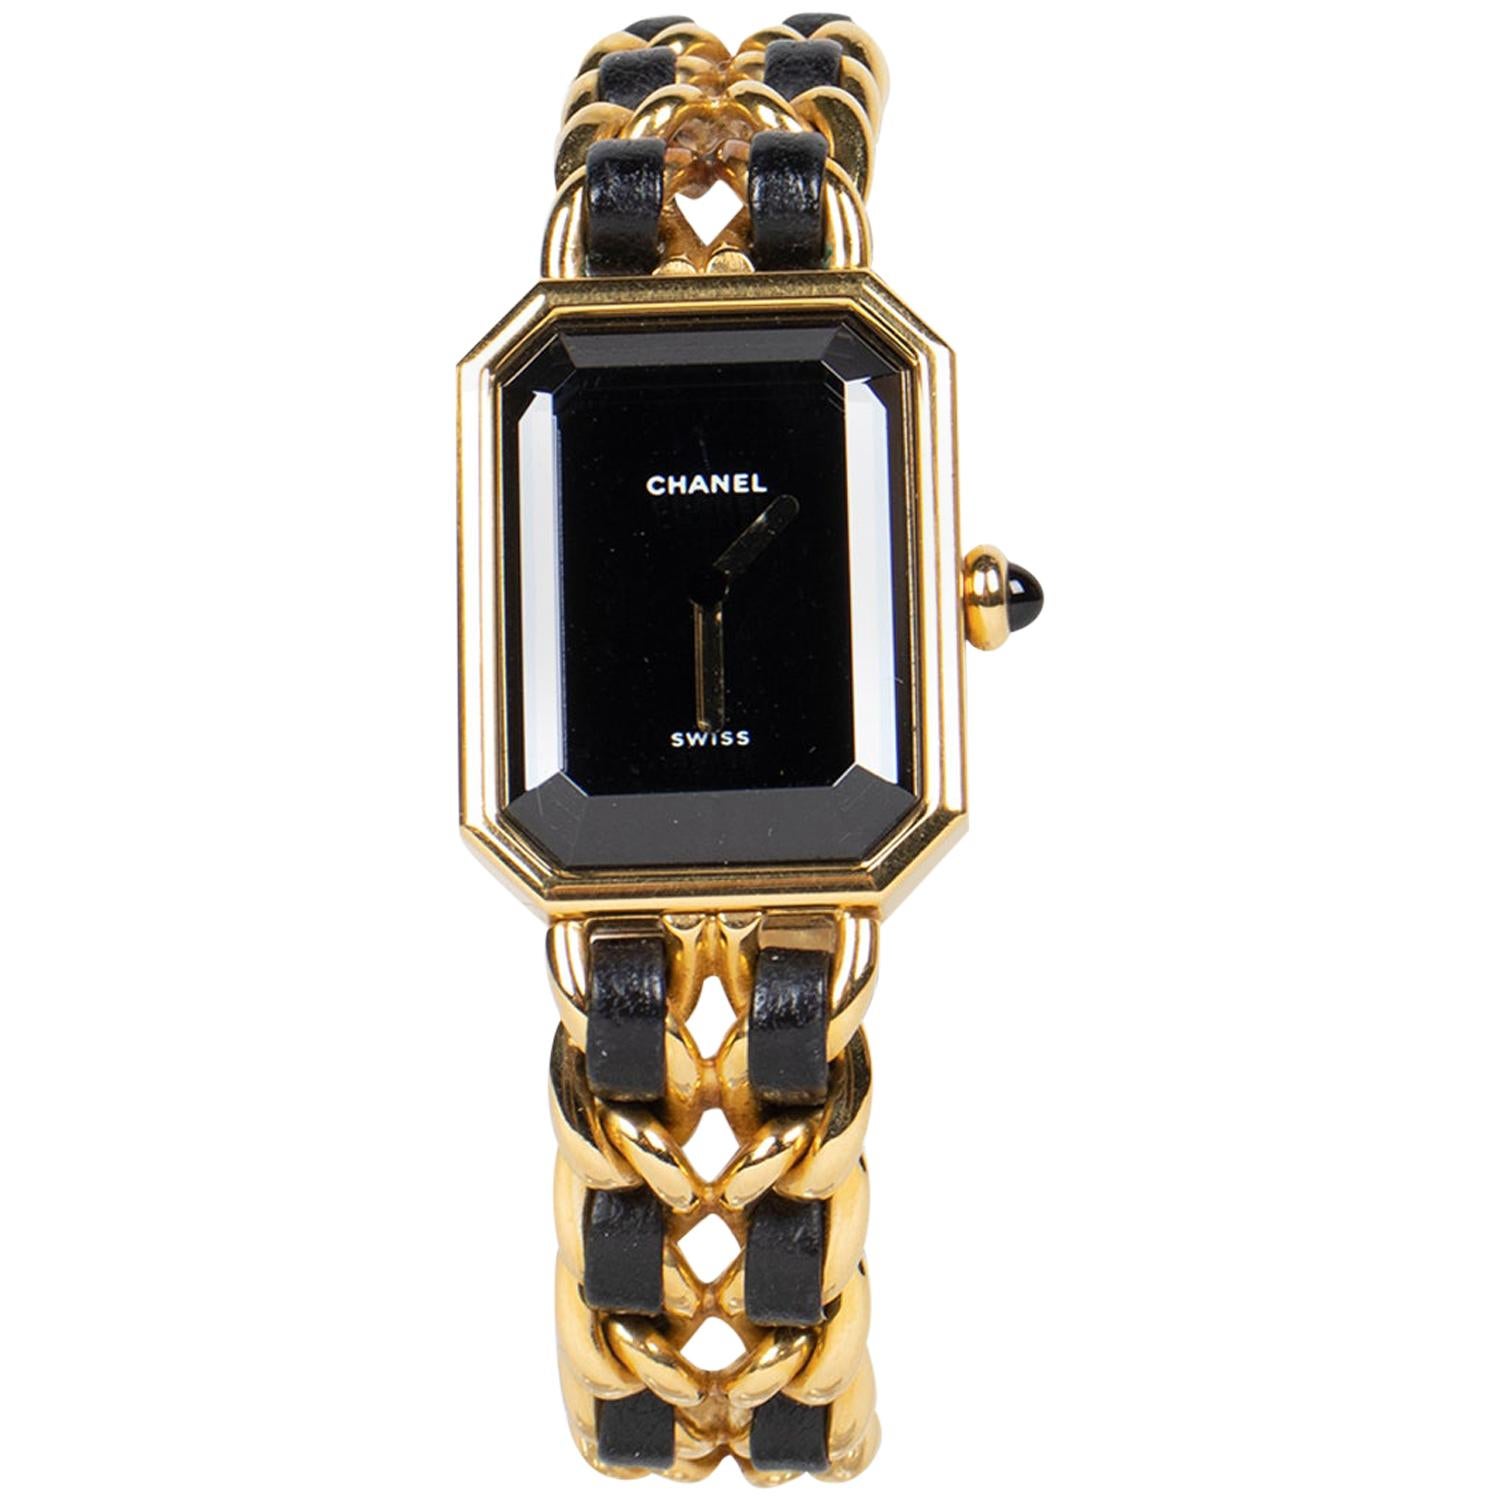 Chanel Premiere Large Watch For Sale